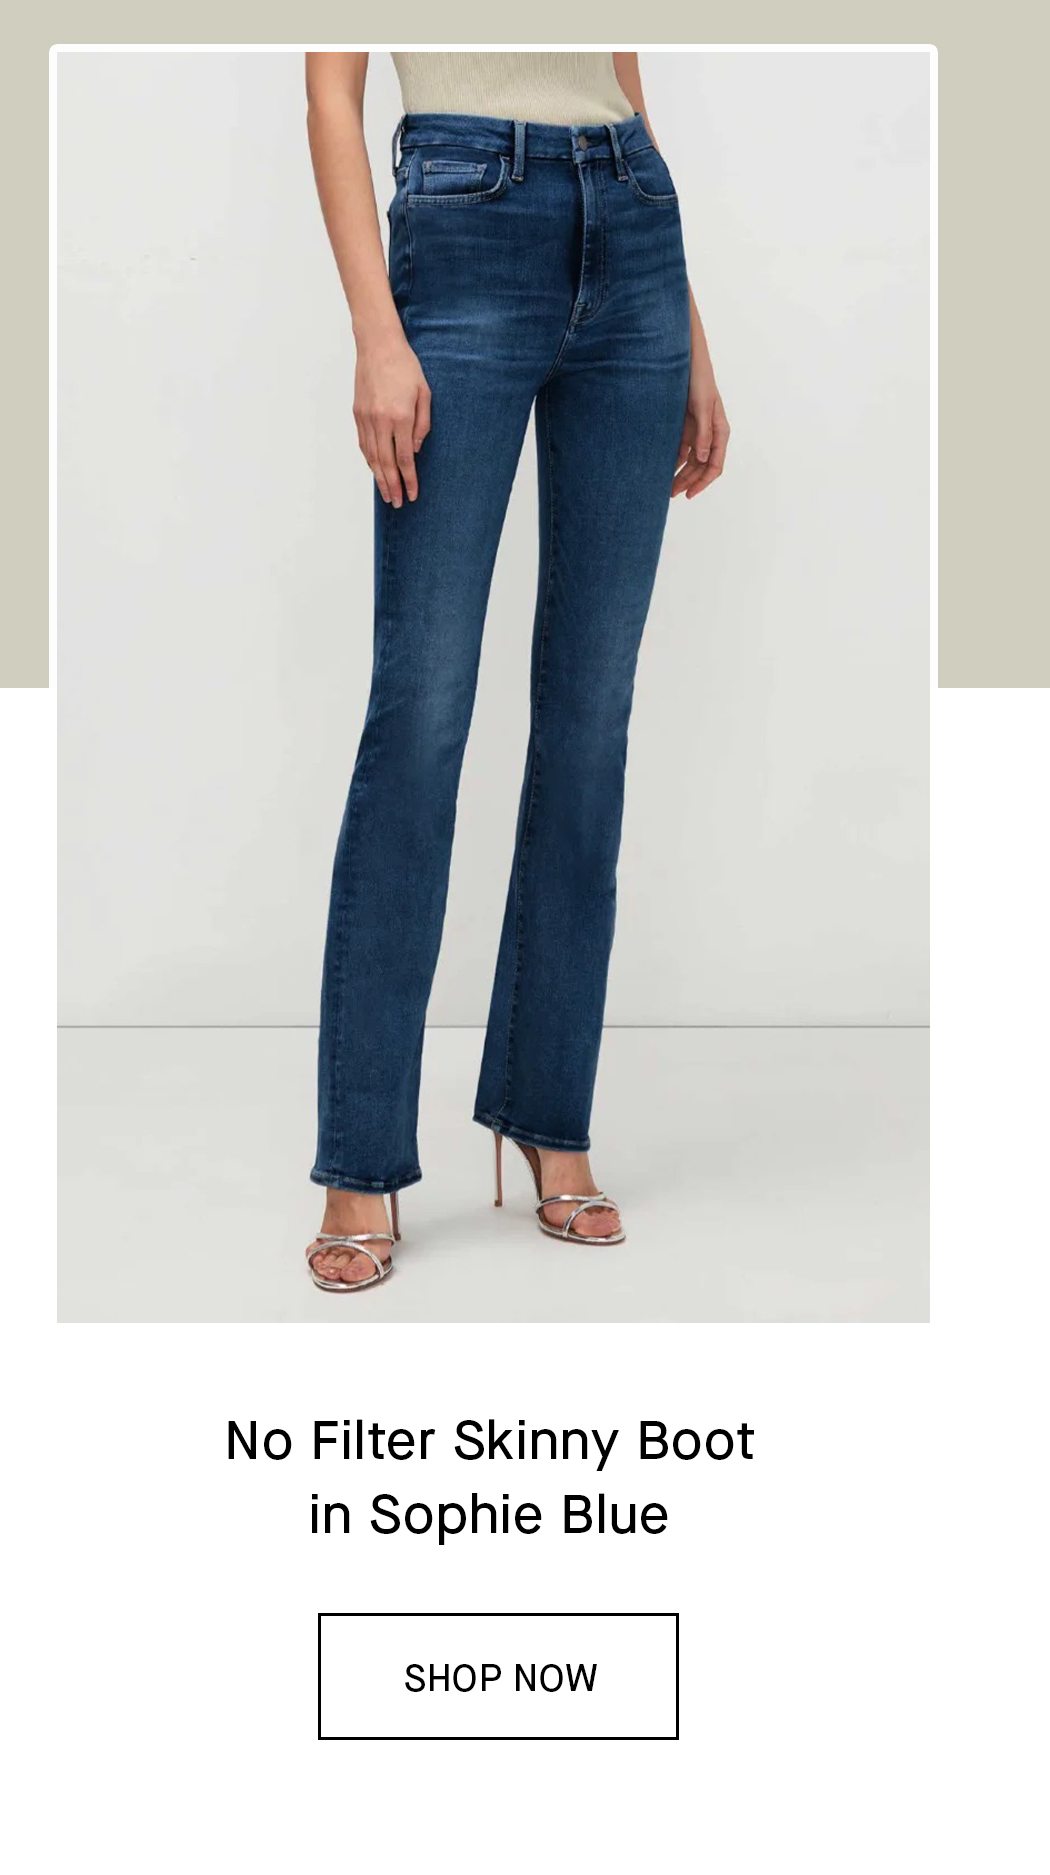 No Filter Ultra High Rise Skinny Boot in Sophie Blue